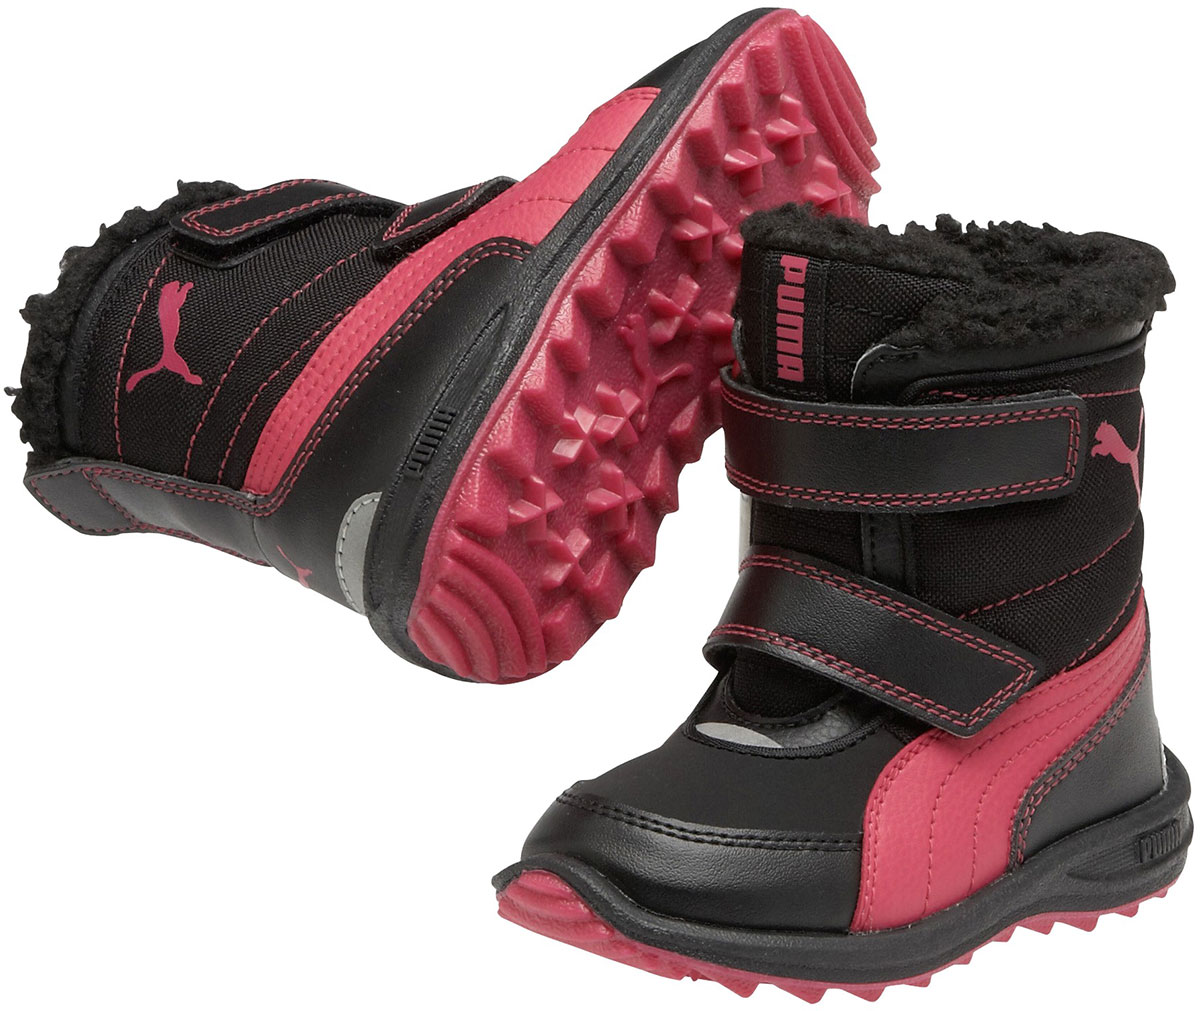 COOLED BOOT KIDS - Children's winter shoes